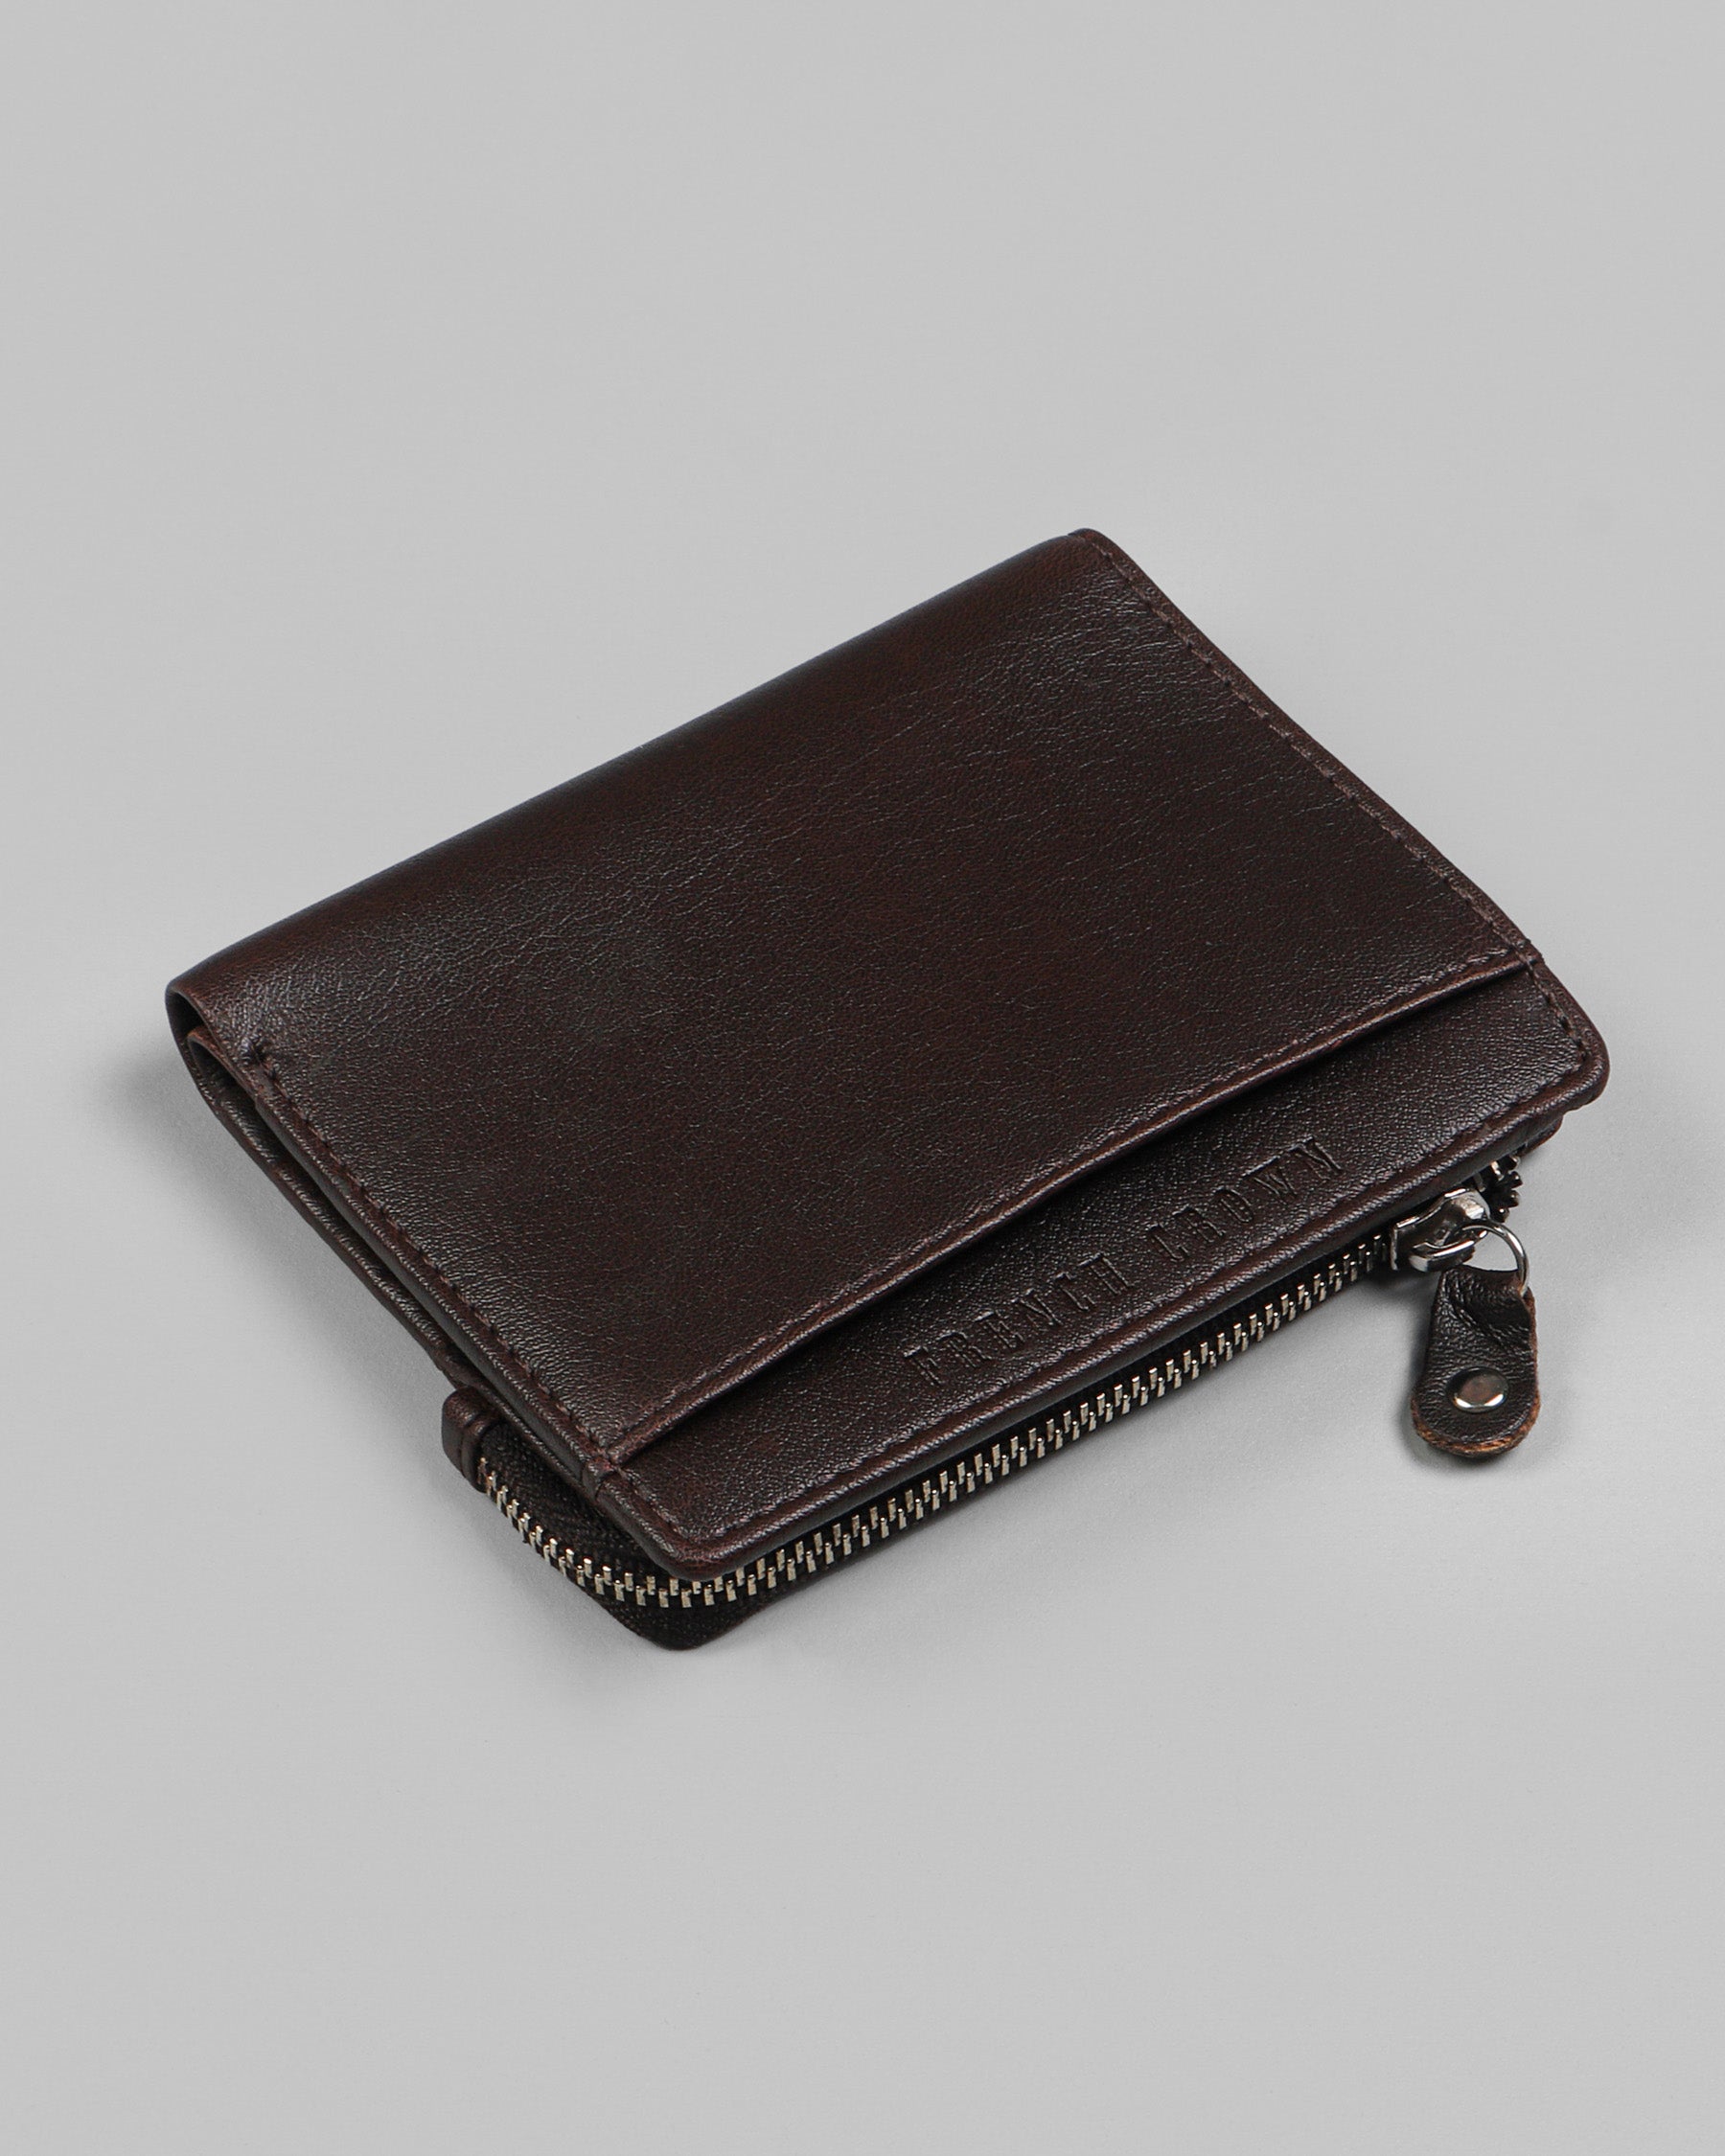 Amazon.com: SENDEFN Wallets for Men Genuine Leather RFID Blocking Bifold  Wallet Credit Card Holder : Clothing, Shoes & Jewelry